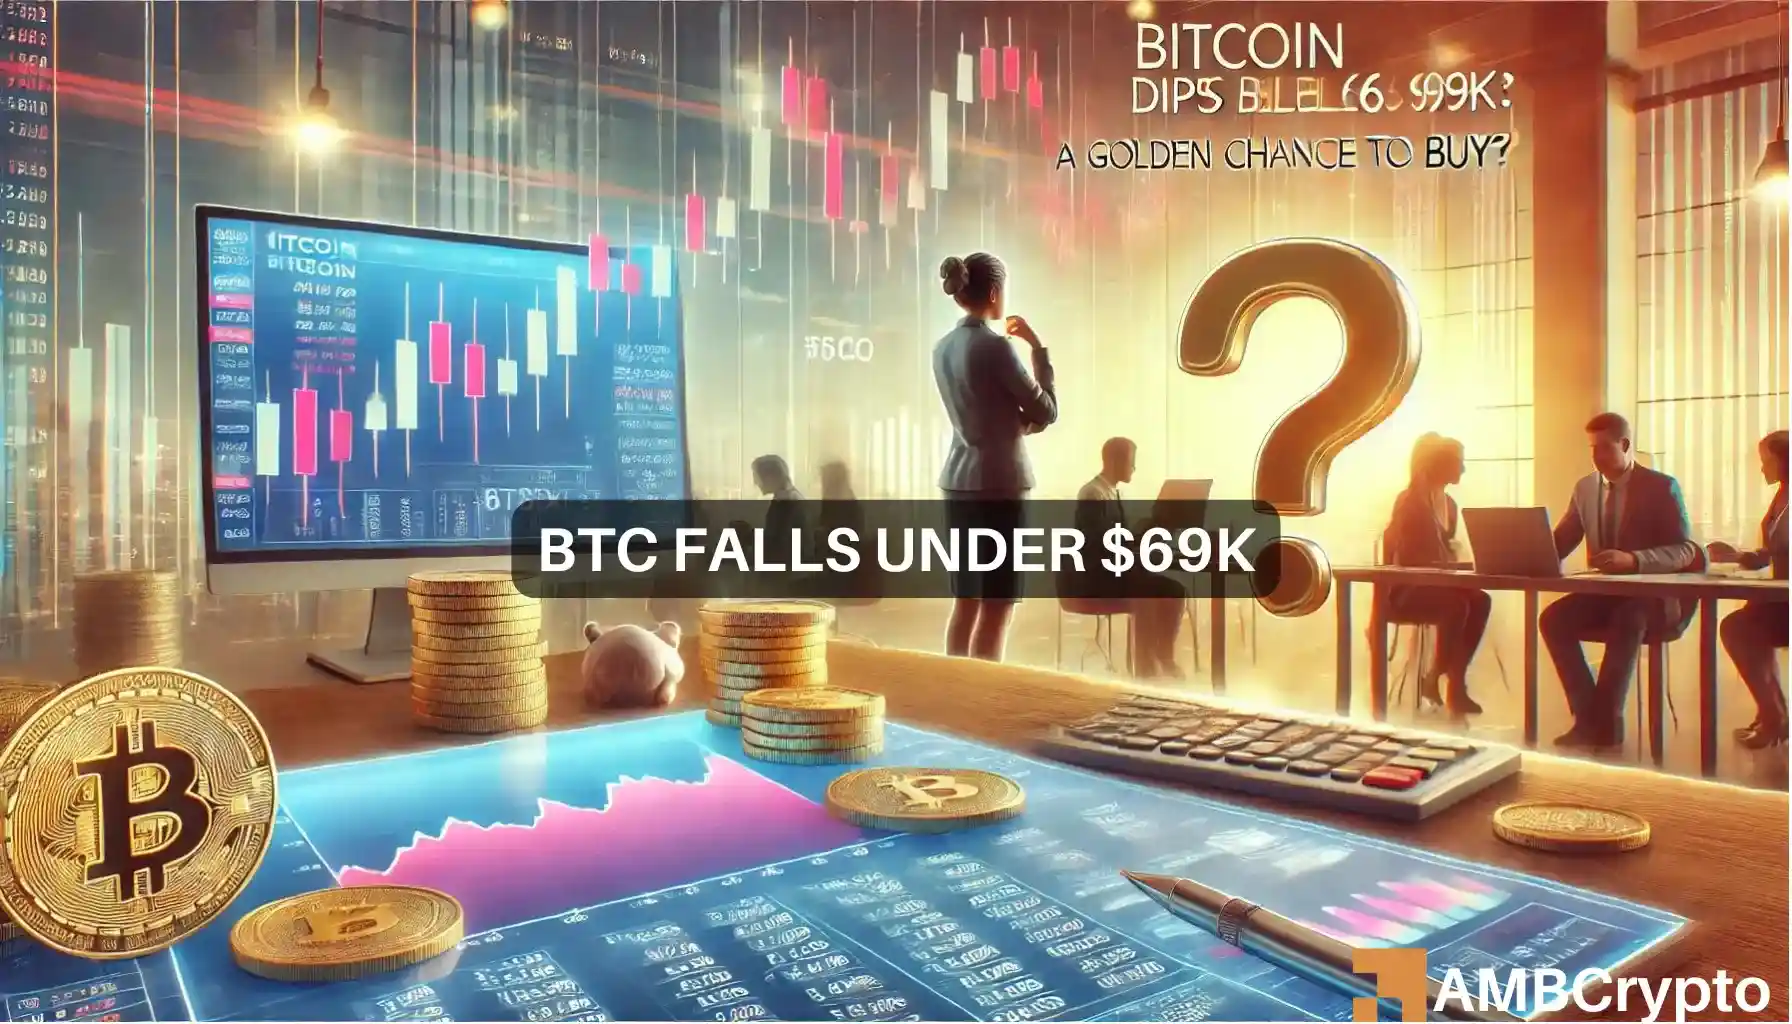 Bitcoin below $69K: Why BTC’s current price might be a steal